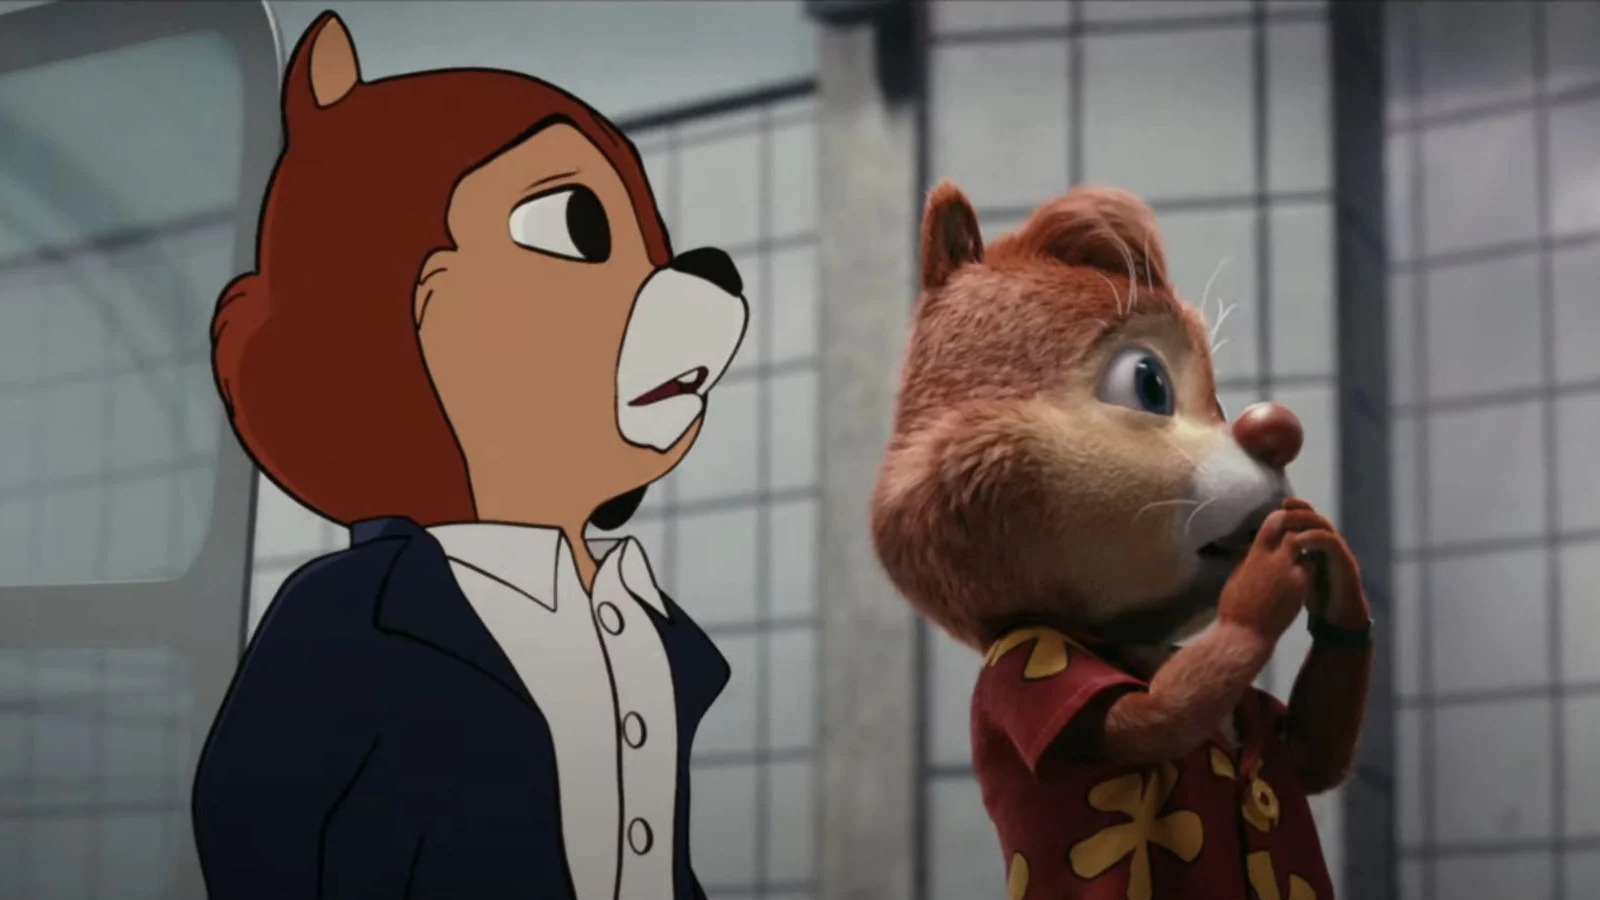 Any Bunny Cartoon Movie - Chip 'N Dale: Rescue Rangers Is Like Shane Black Remaking Roger Rabbit